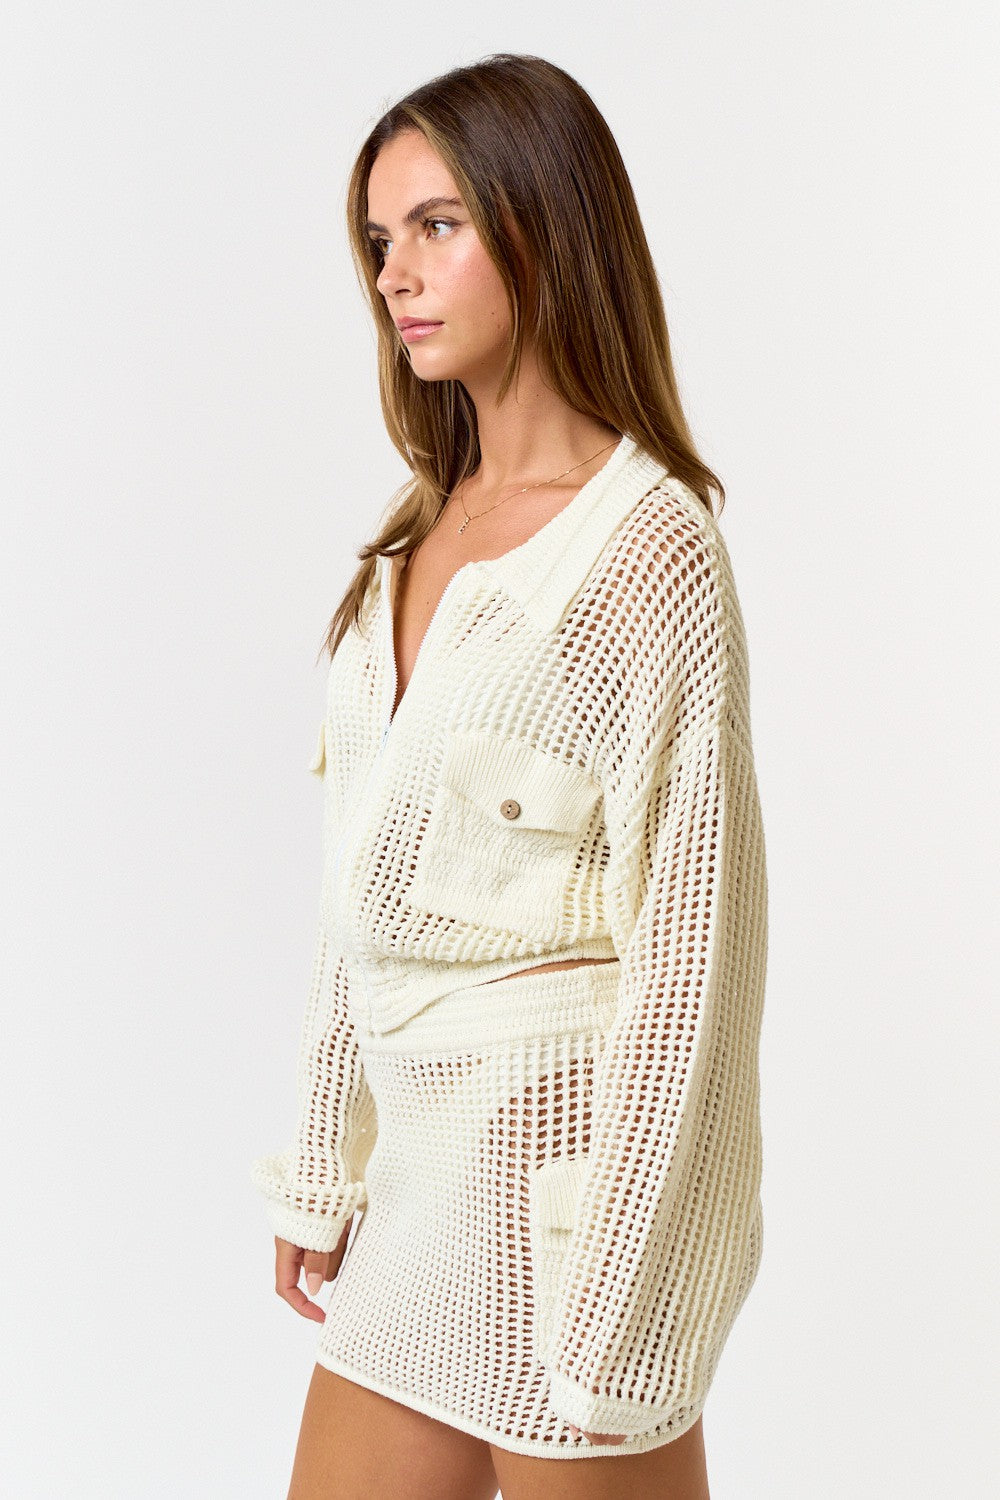 Pool Party Sweater Cream, Jacket by Blue Blush | LIT Boutique